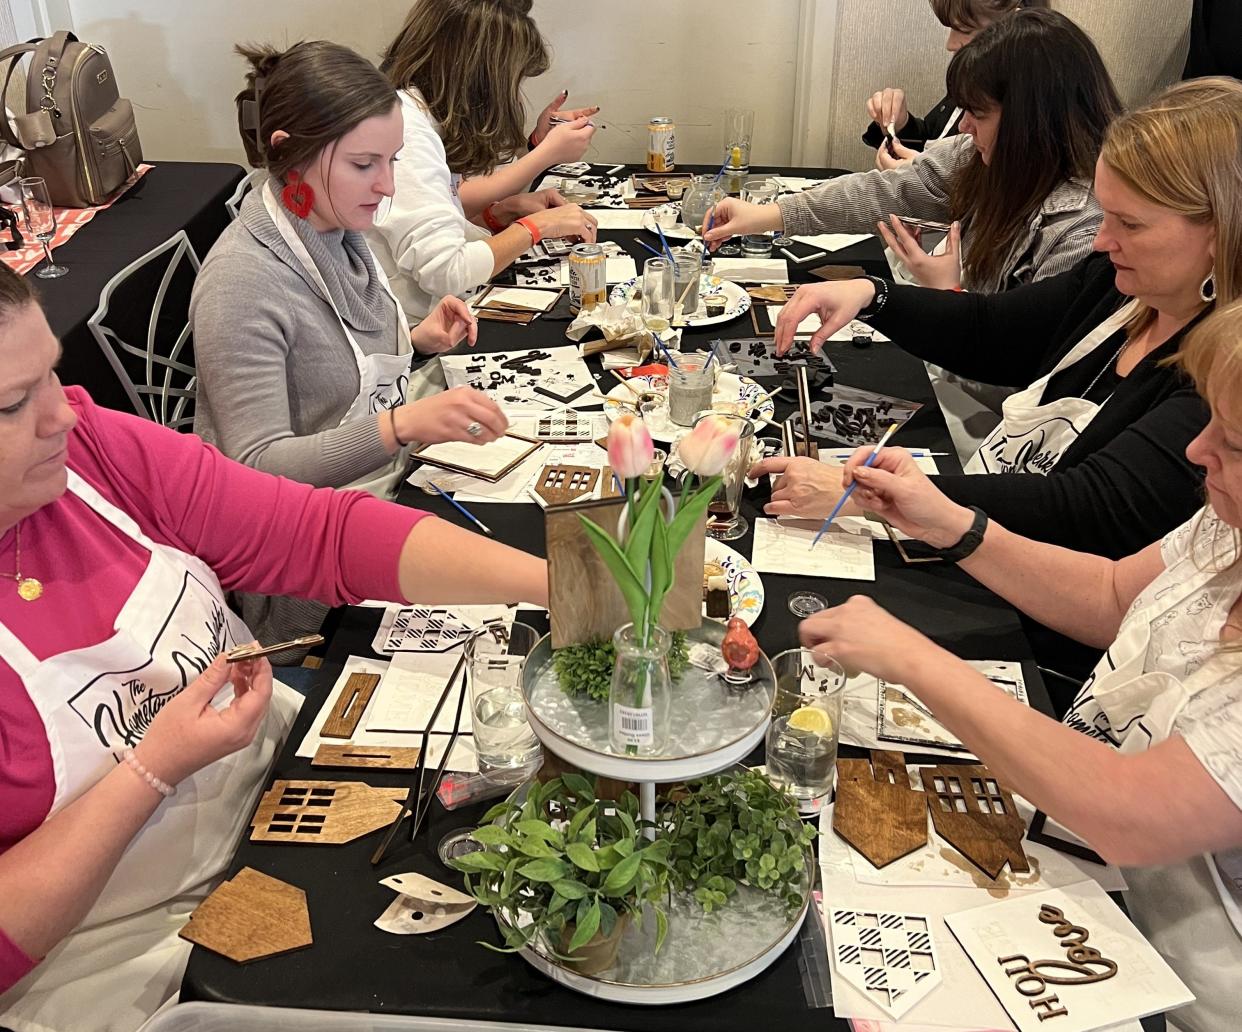 Paint and sips are popular for Galentine's Day, such as the Made Local Events' gathering, which is entering its fifth year. The event will take place Feb. 11 at The Exchange at Bridge Park in Dublin.